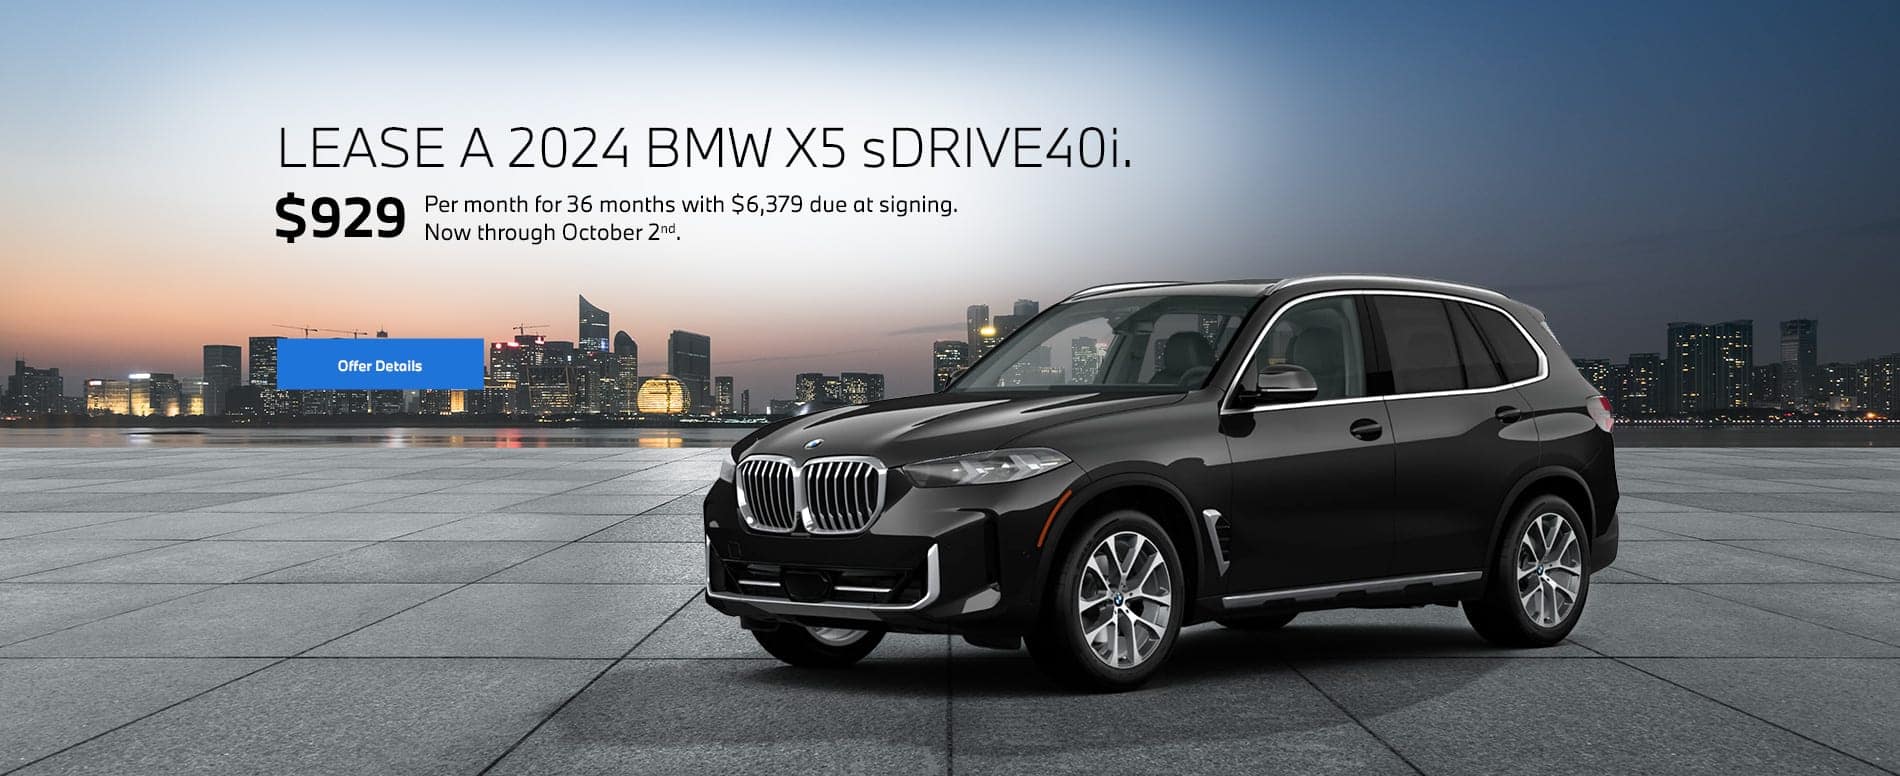 2024 X5 lease starting at $929 per month for 36 months